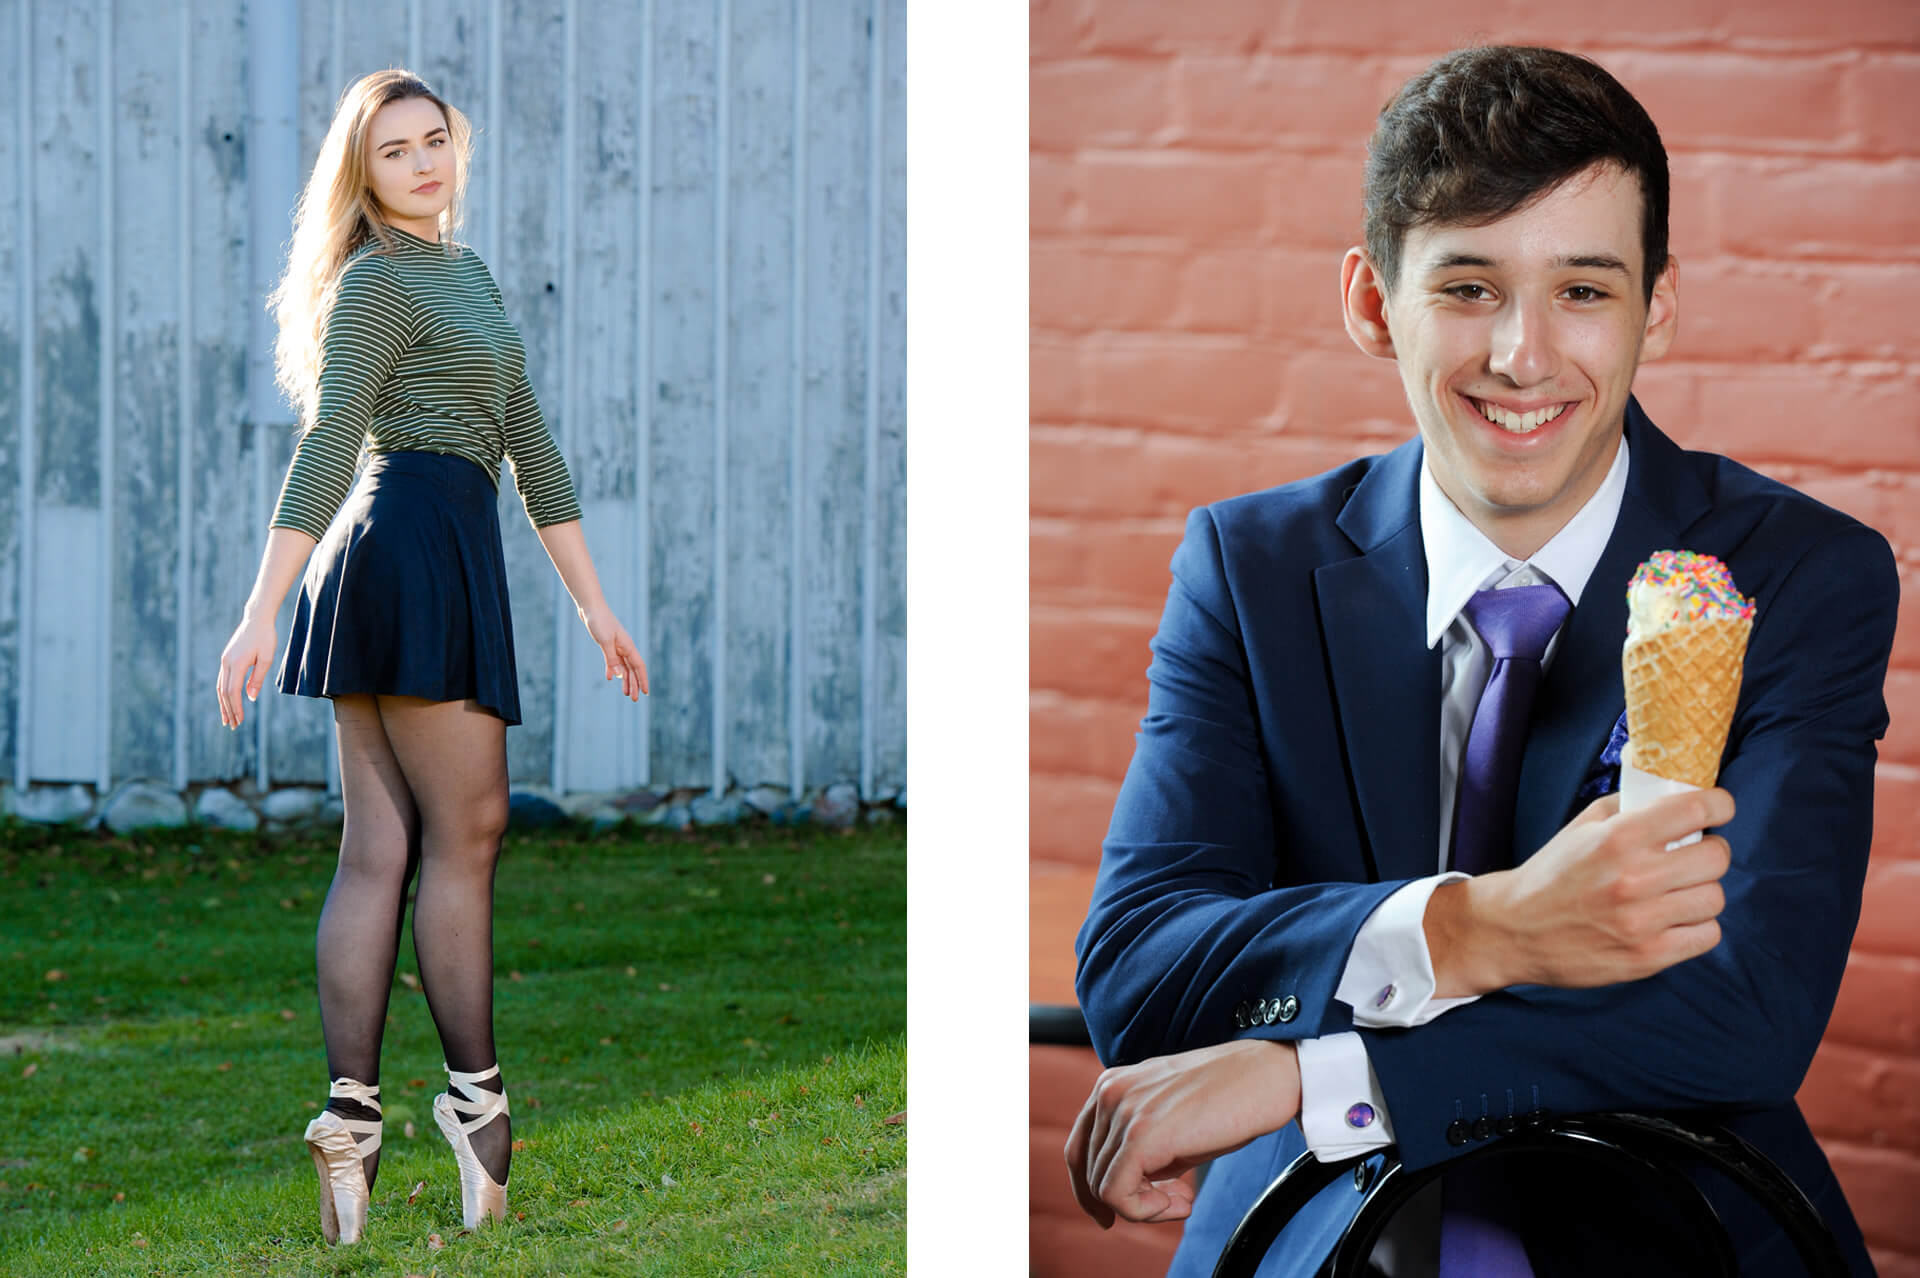 Troy High School senior poses in her ballet shoes for a country dance senior photo while a Troy High senior boy poses in his suit with an ice cream cone near downtown Rochester, Michigan.